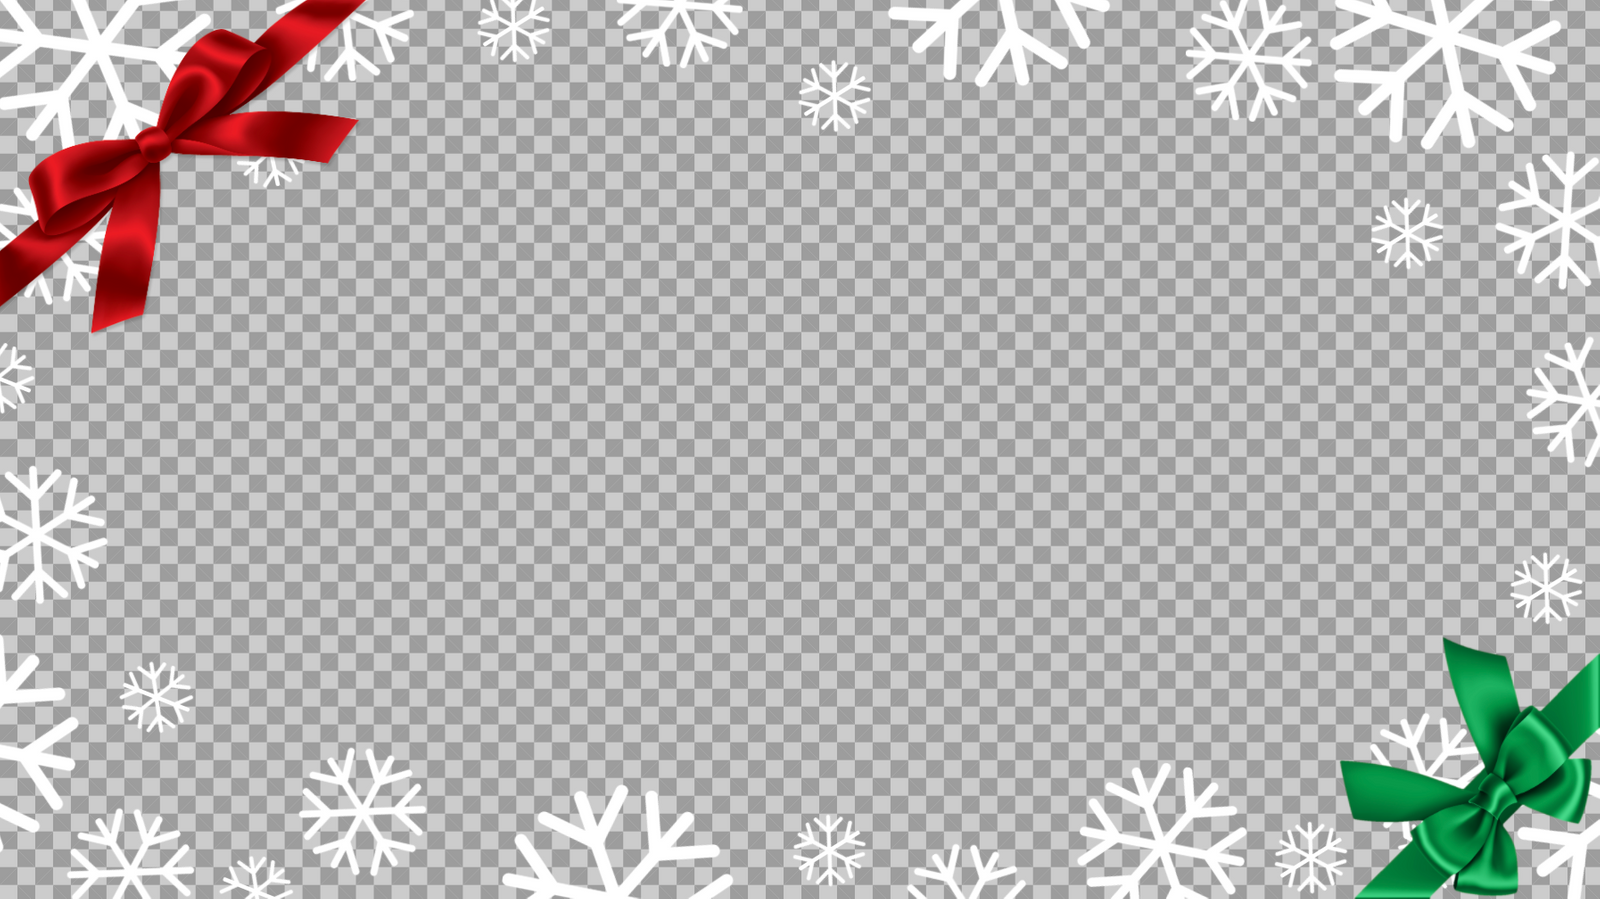 Customizable PNG Christmas Frames for Photos, Videos, and Collages